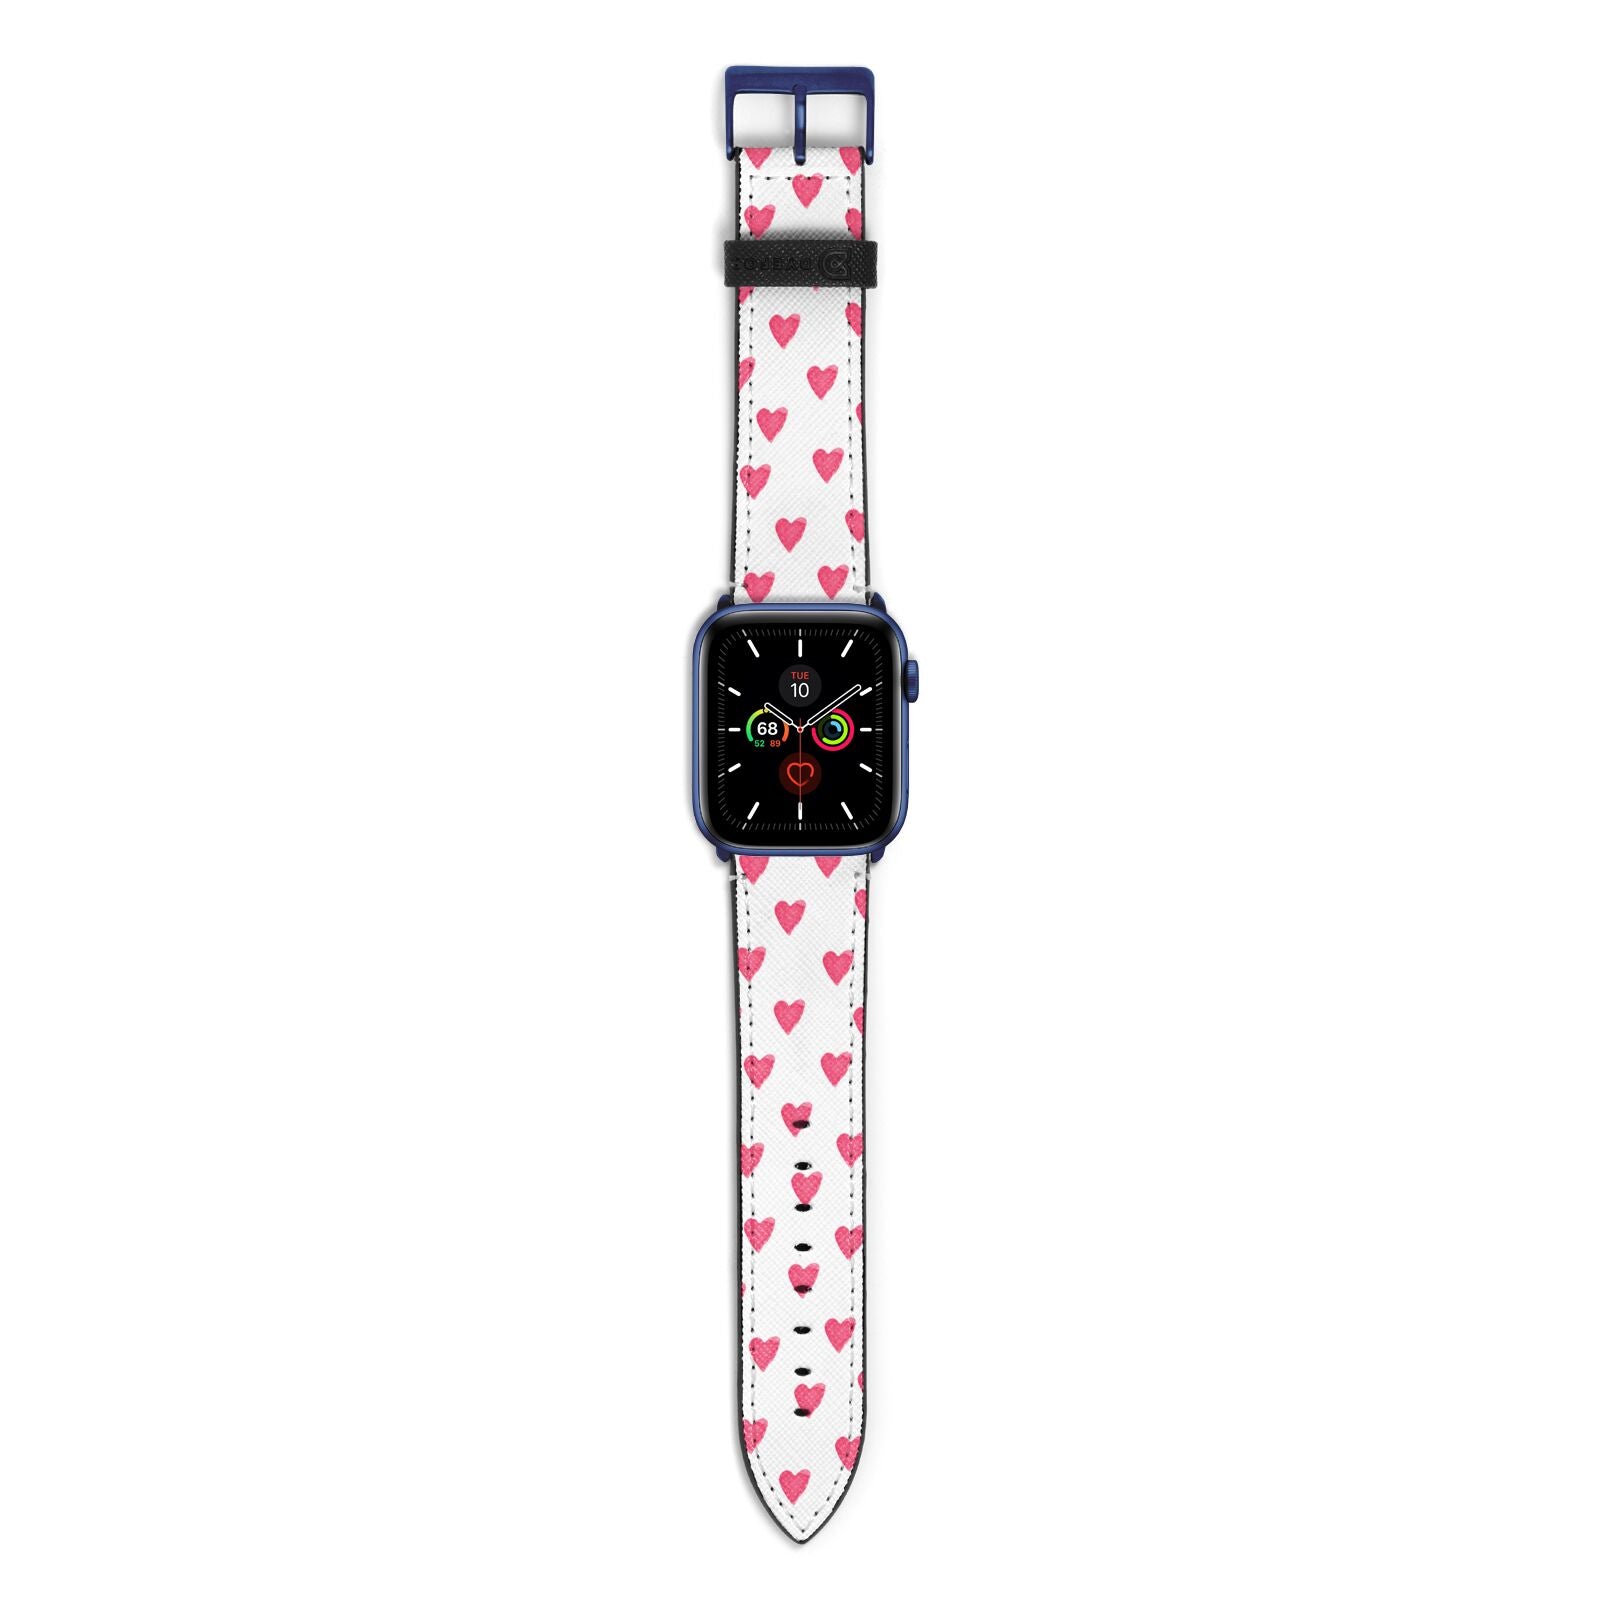 Heart Patterned Apple Watch Strap with Blue Hardware